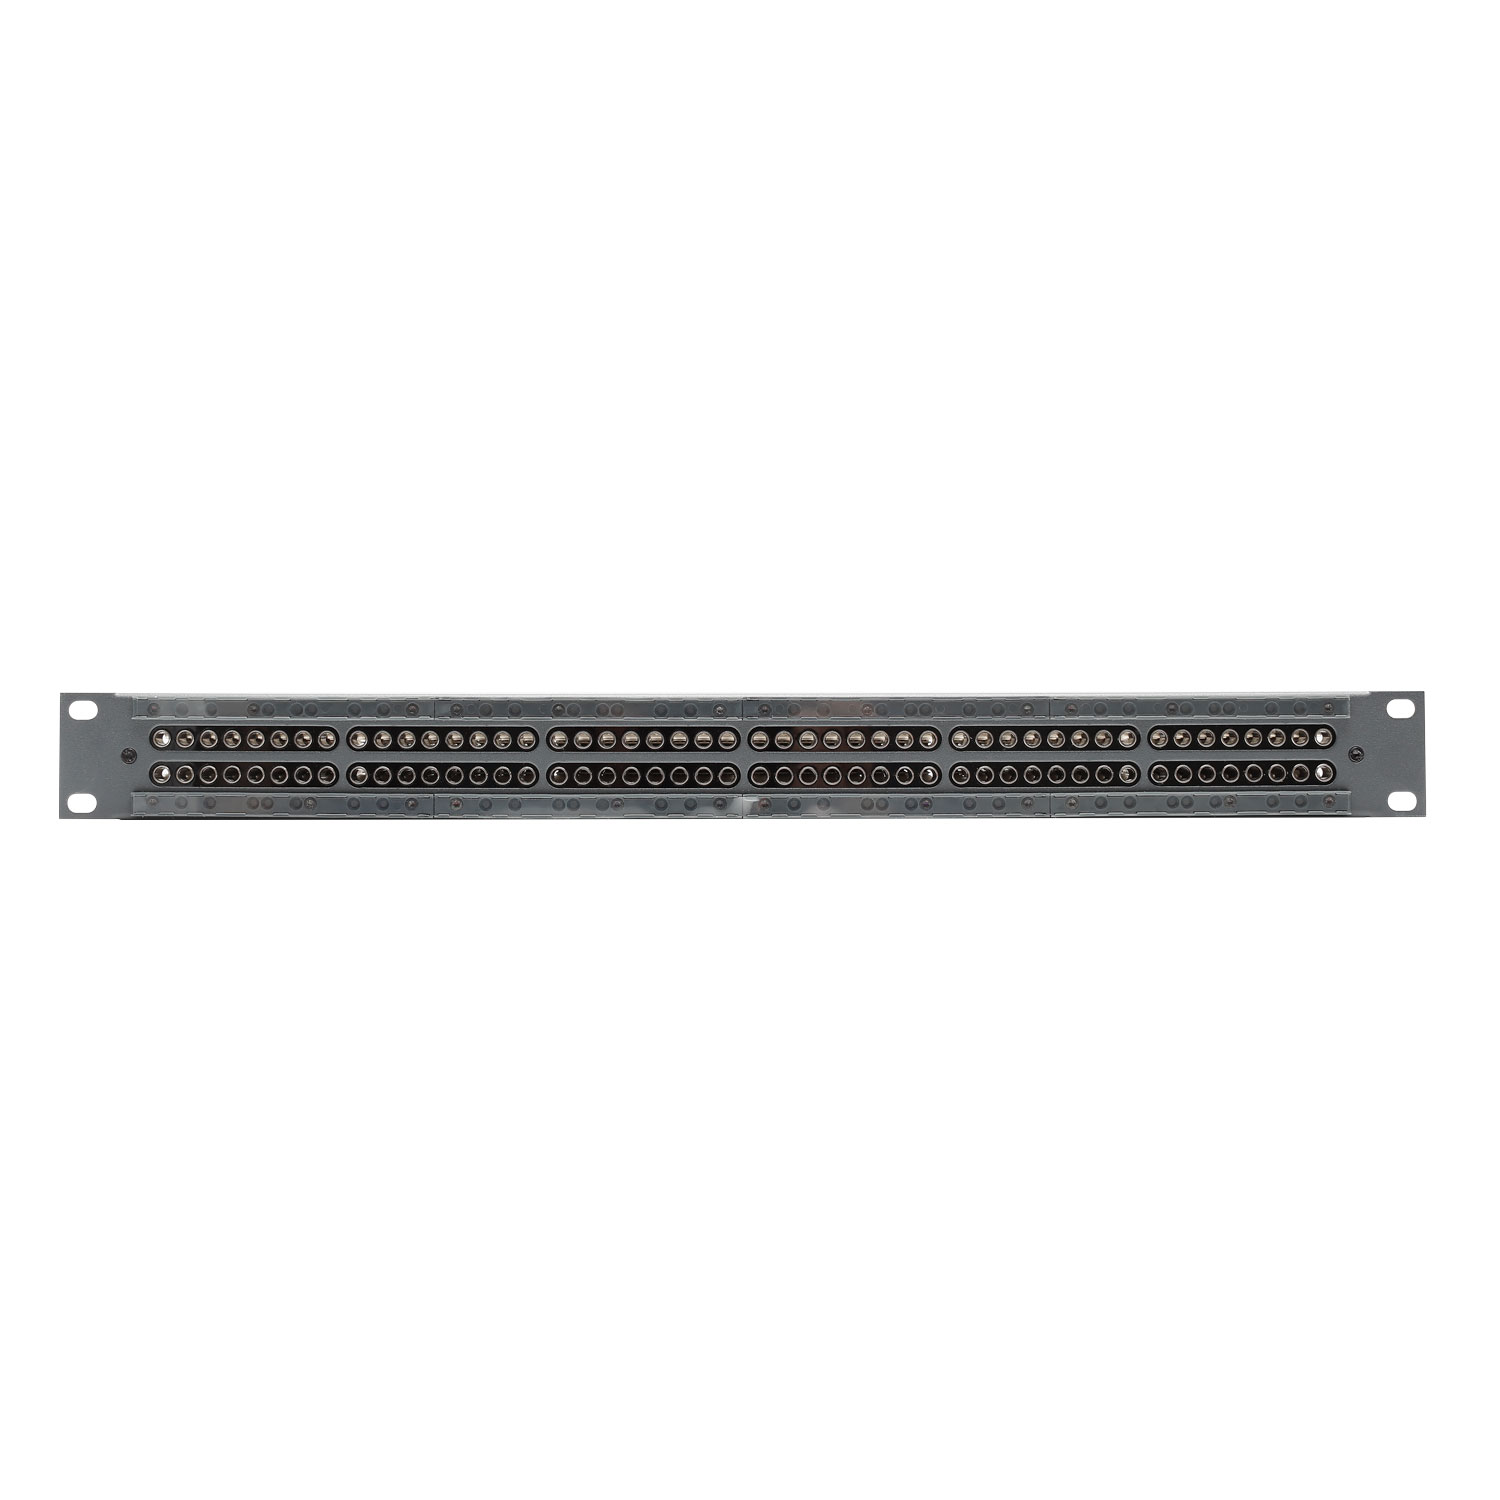 TT-Phone studio patch panel 1U, high quality, 96 TT-Phone sockets silver-plated with 5 soldering lugs